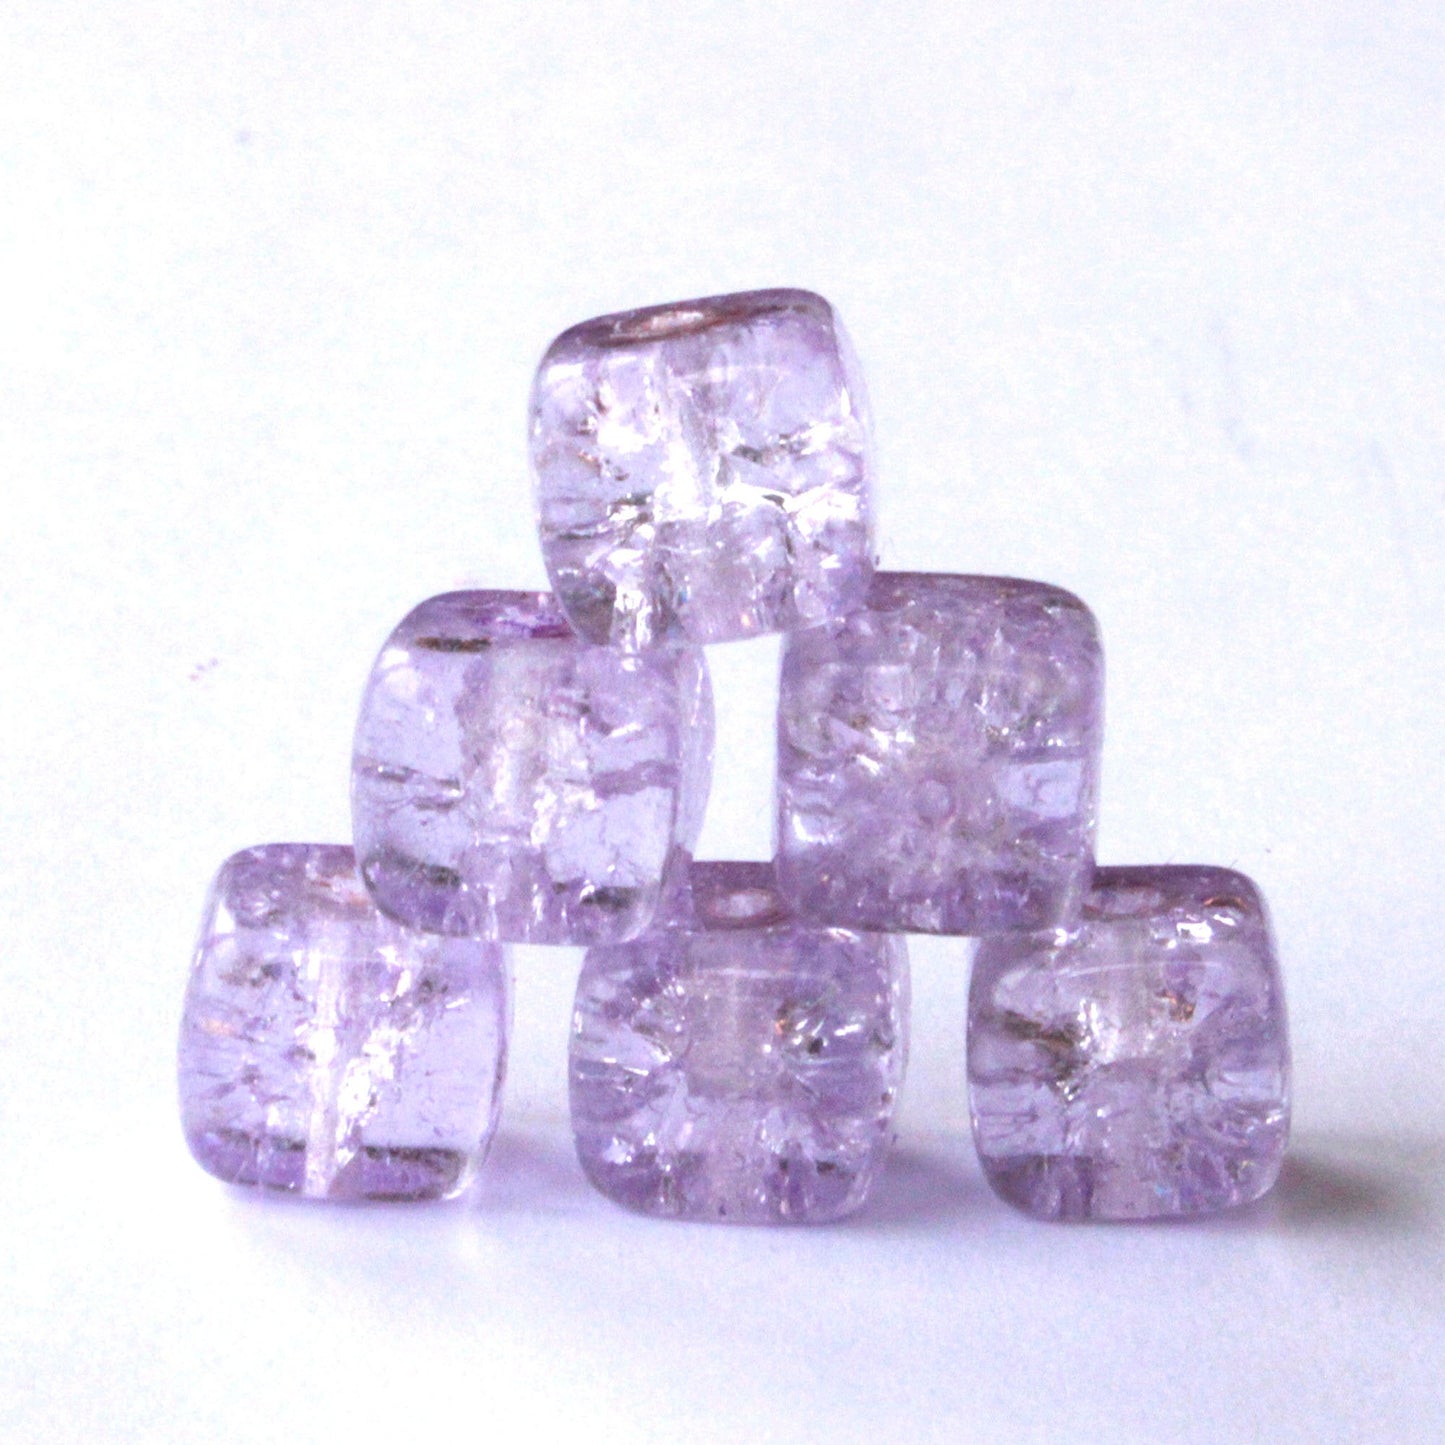 9x11mm Glass Cube Beads - Lilac Crackle - 30 Beads